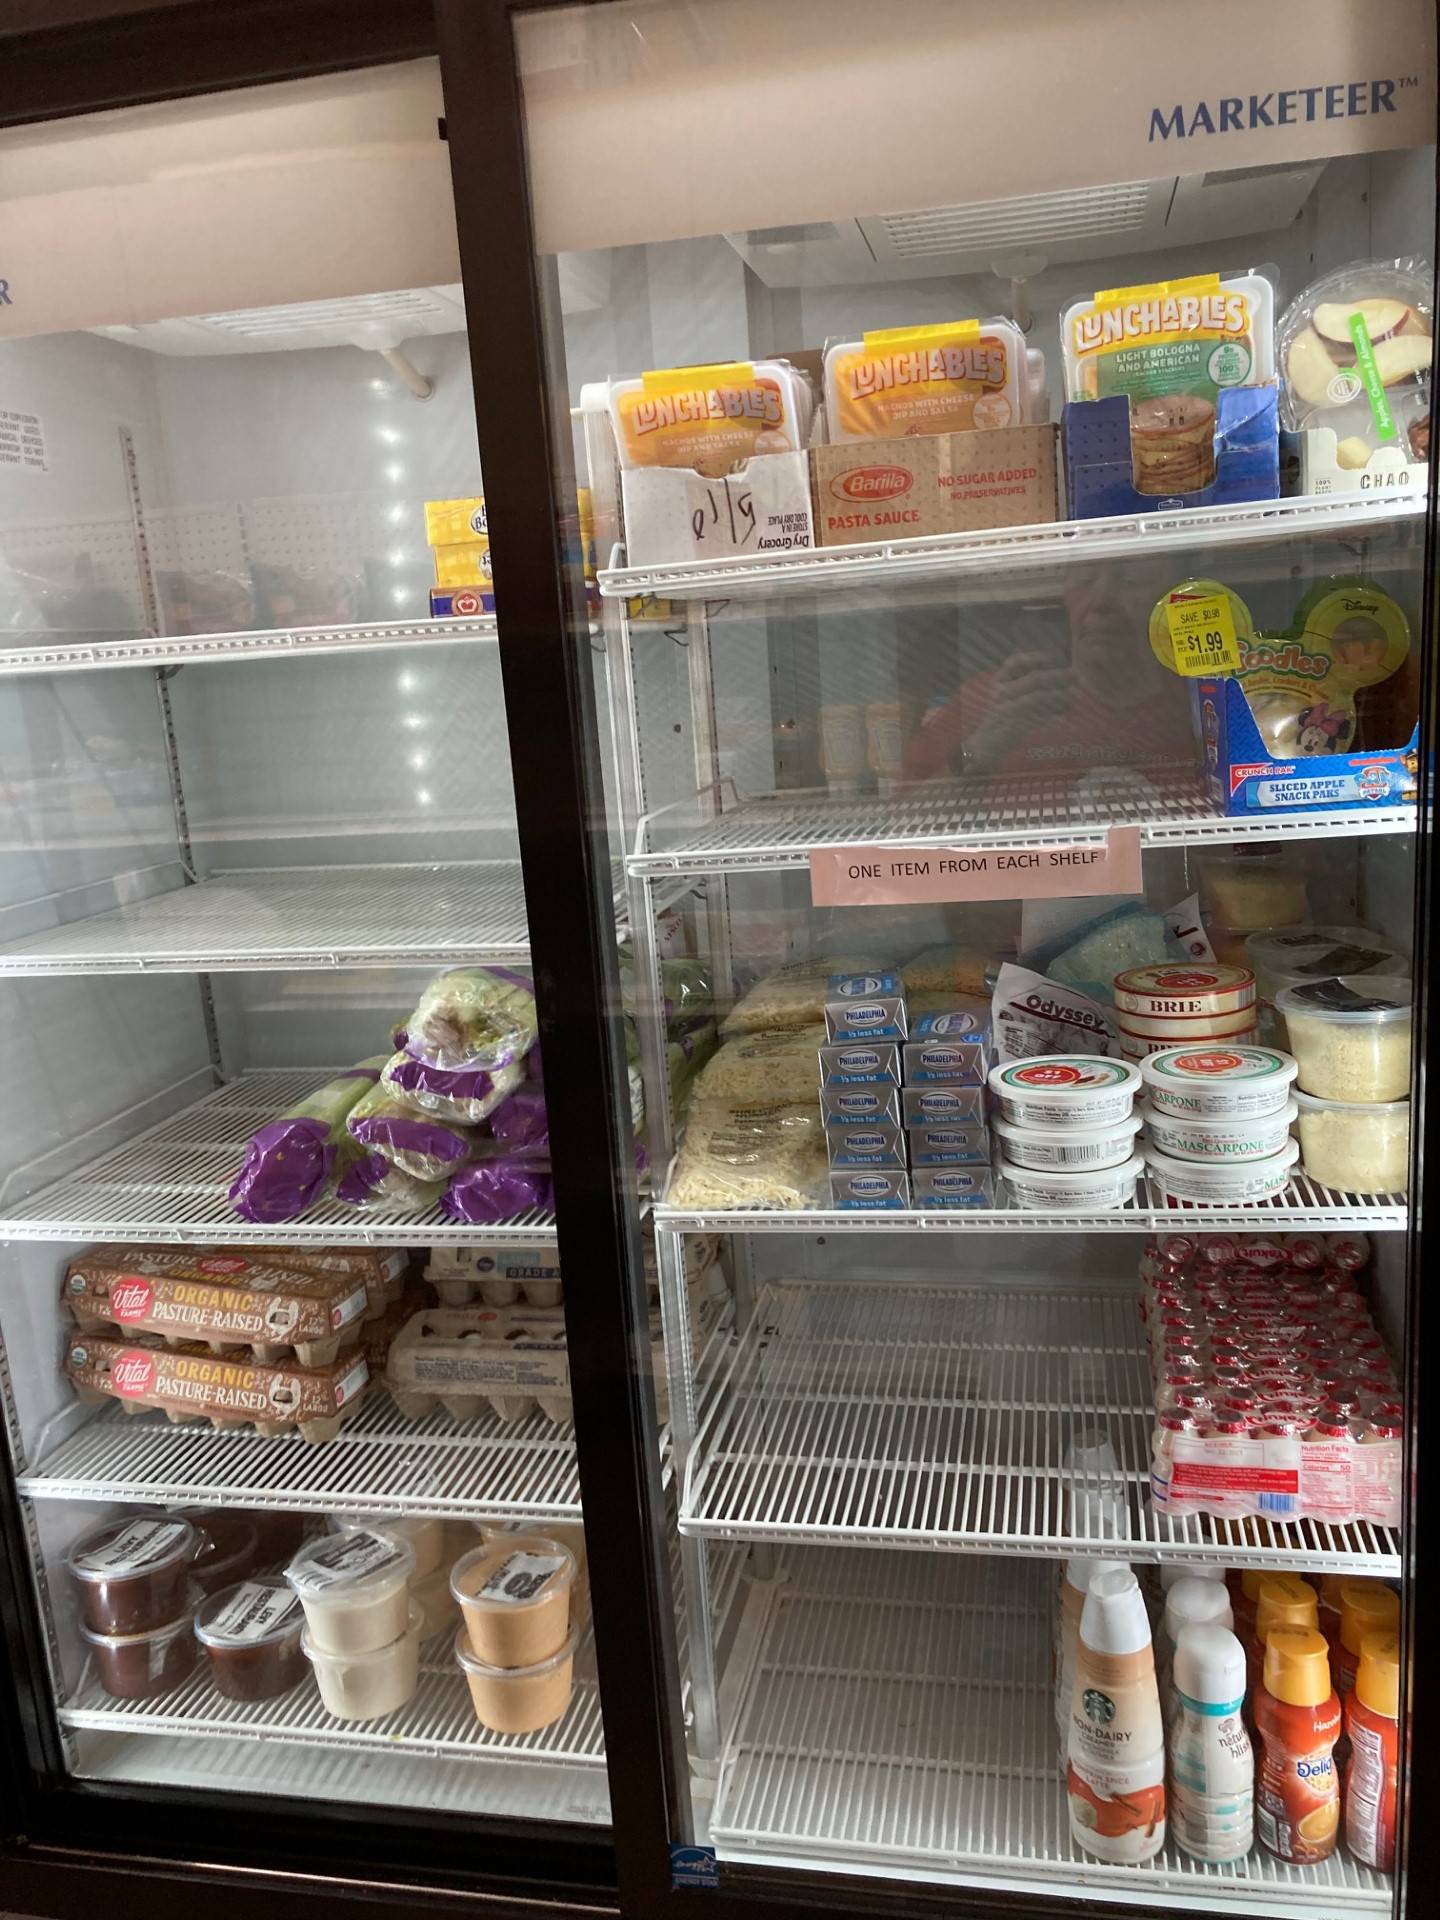 Demand has grown at the Streatorland Food Pantry. In March the pantry served 167 local families including 476 people. In May the number of families served rose to 232 with 716 people included.